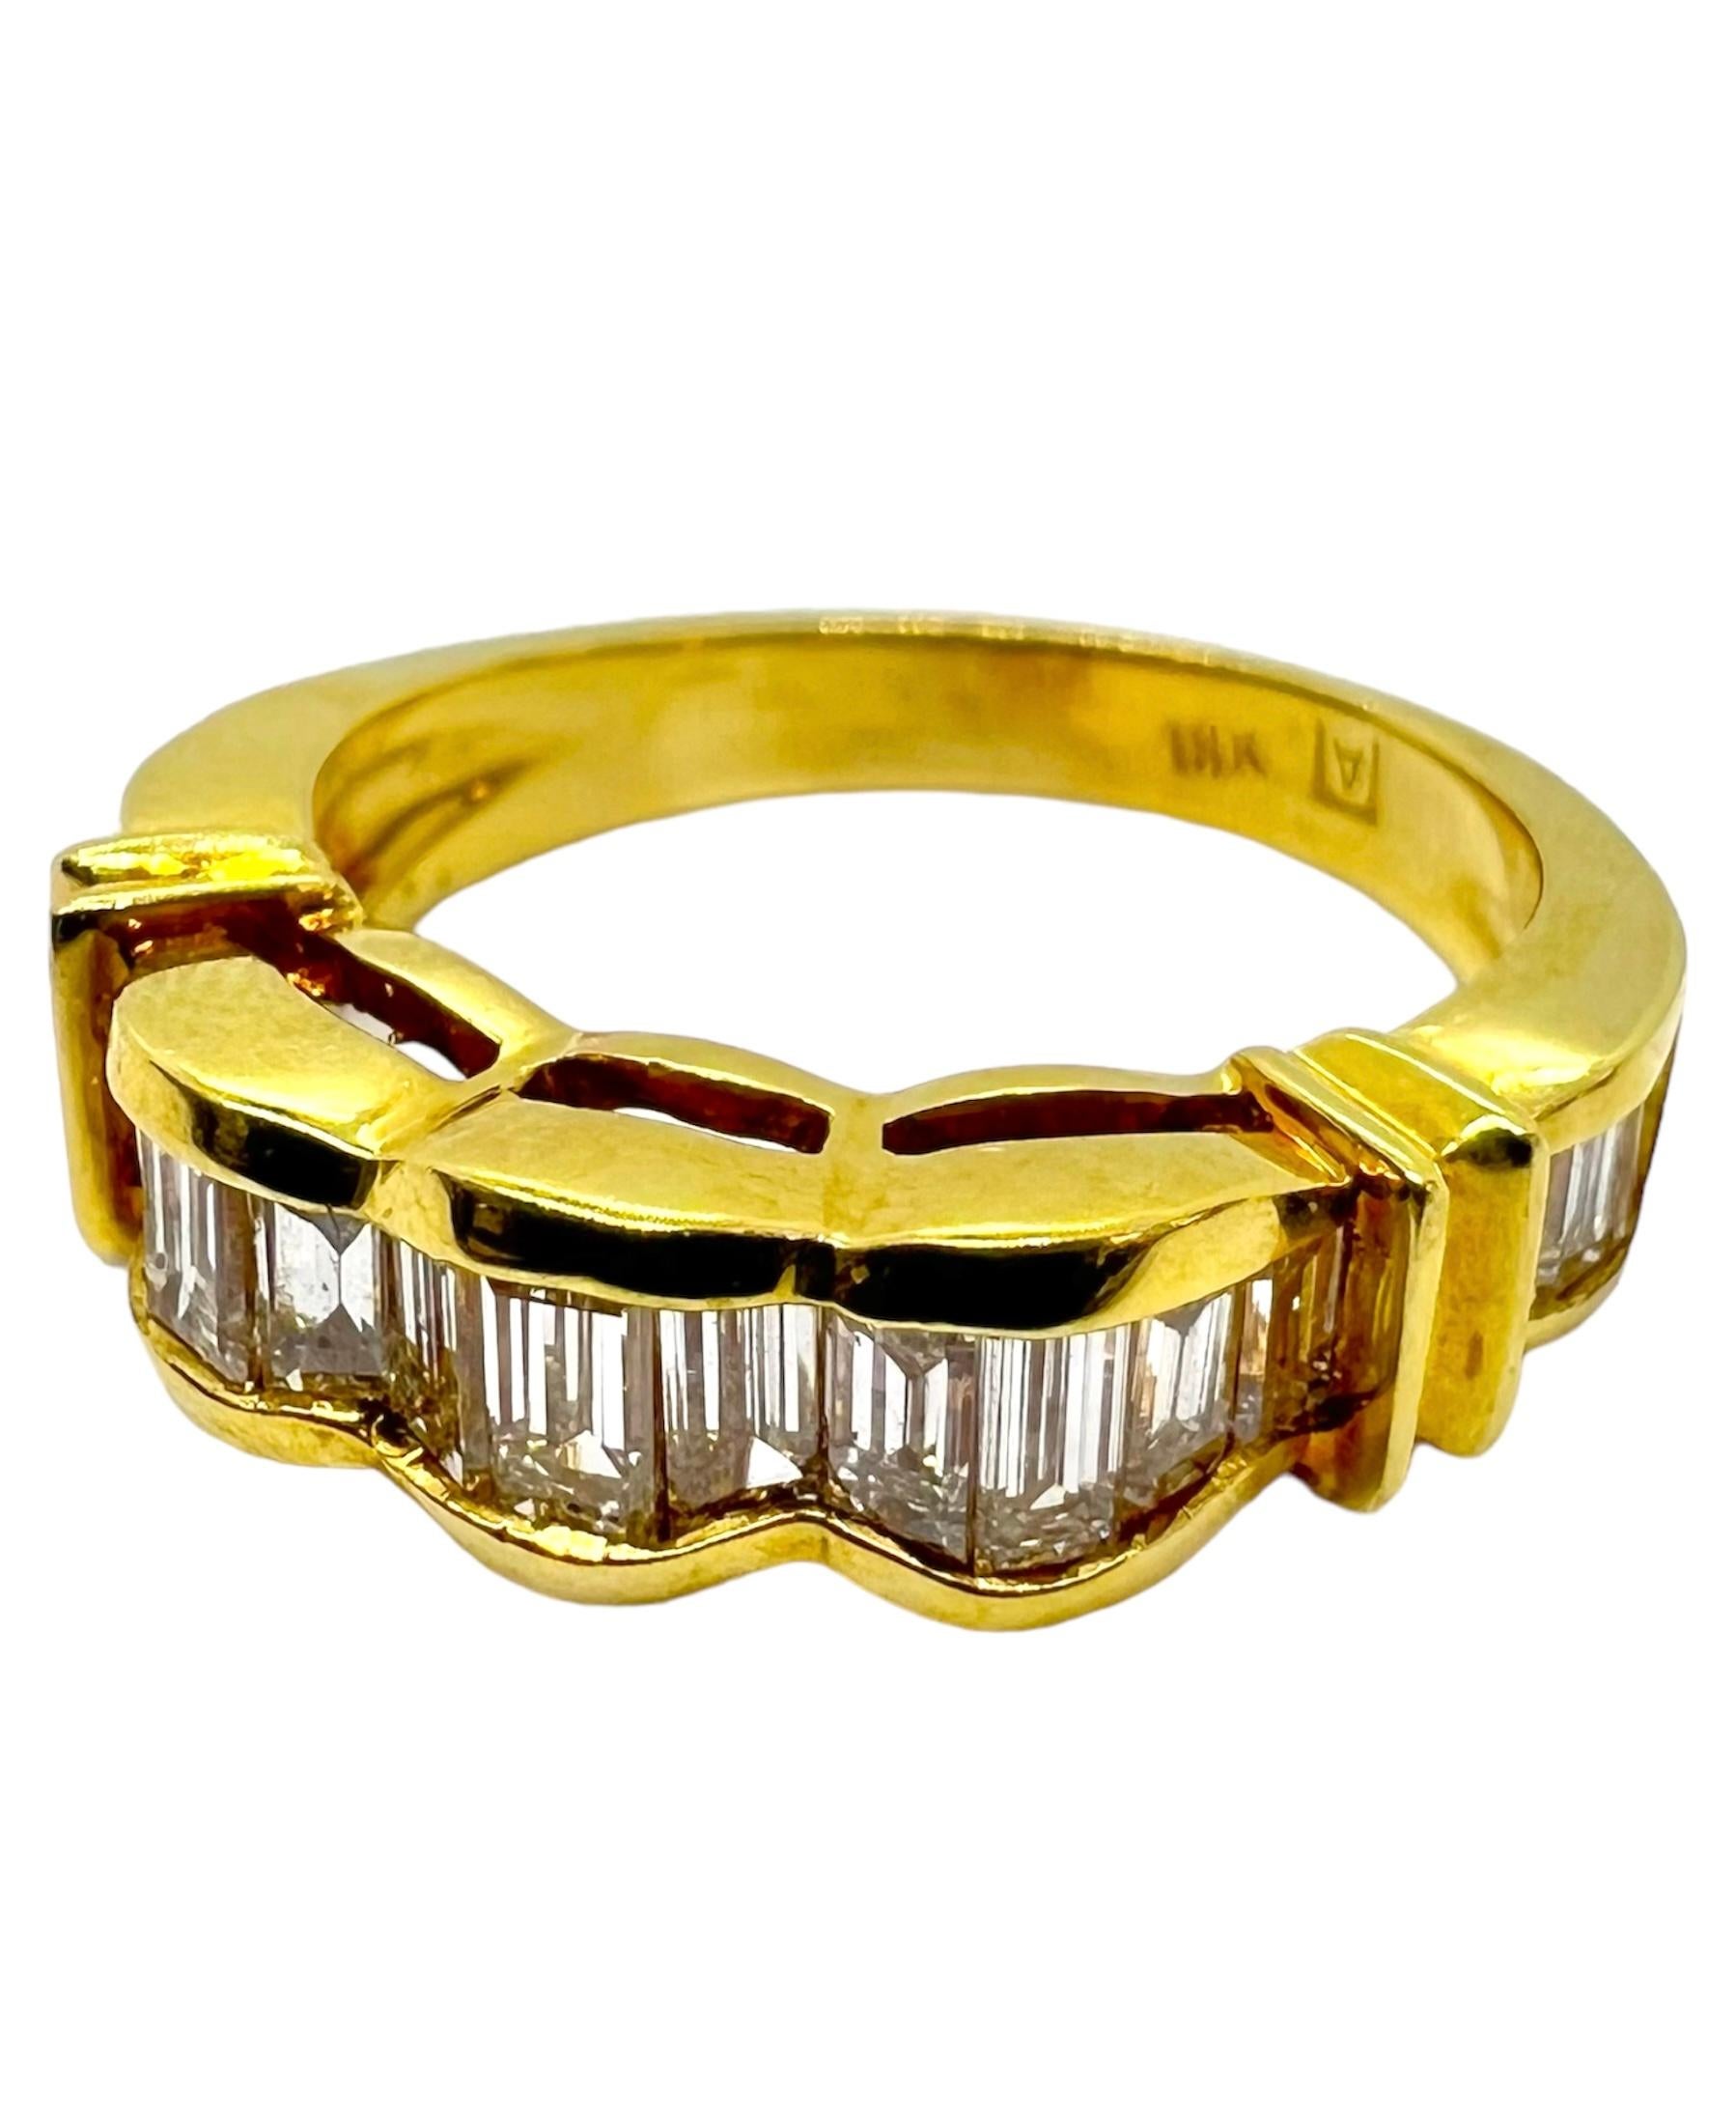 18K yellow gold band ring with diamonds.

Sophia D by Joseph Dardashti LTD has been known worldwide for 35 years and are inspired by classic Art Deco design that merges with modern manufacturing techniques.  